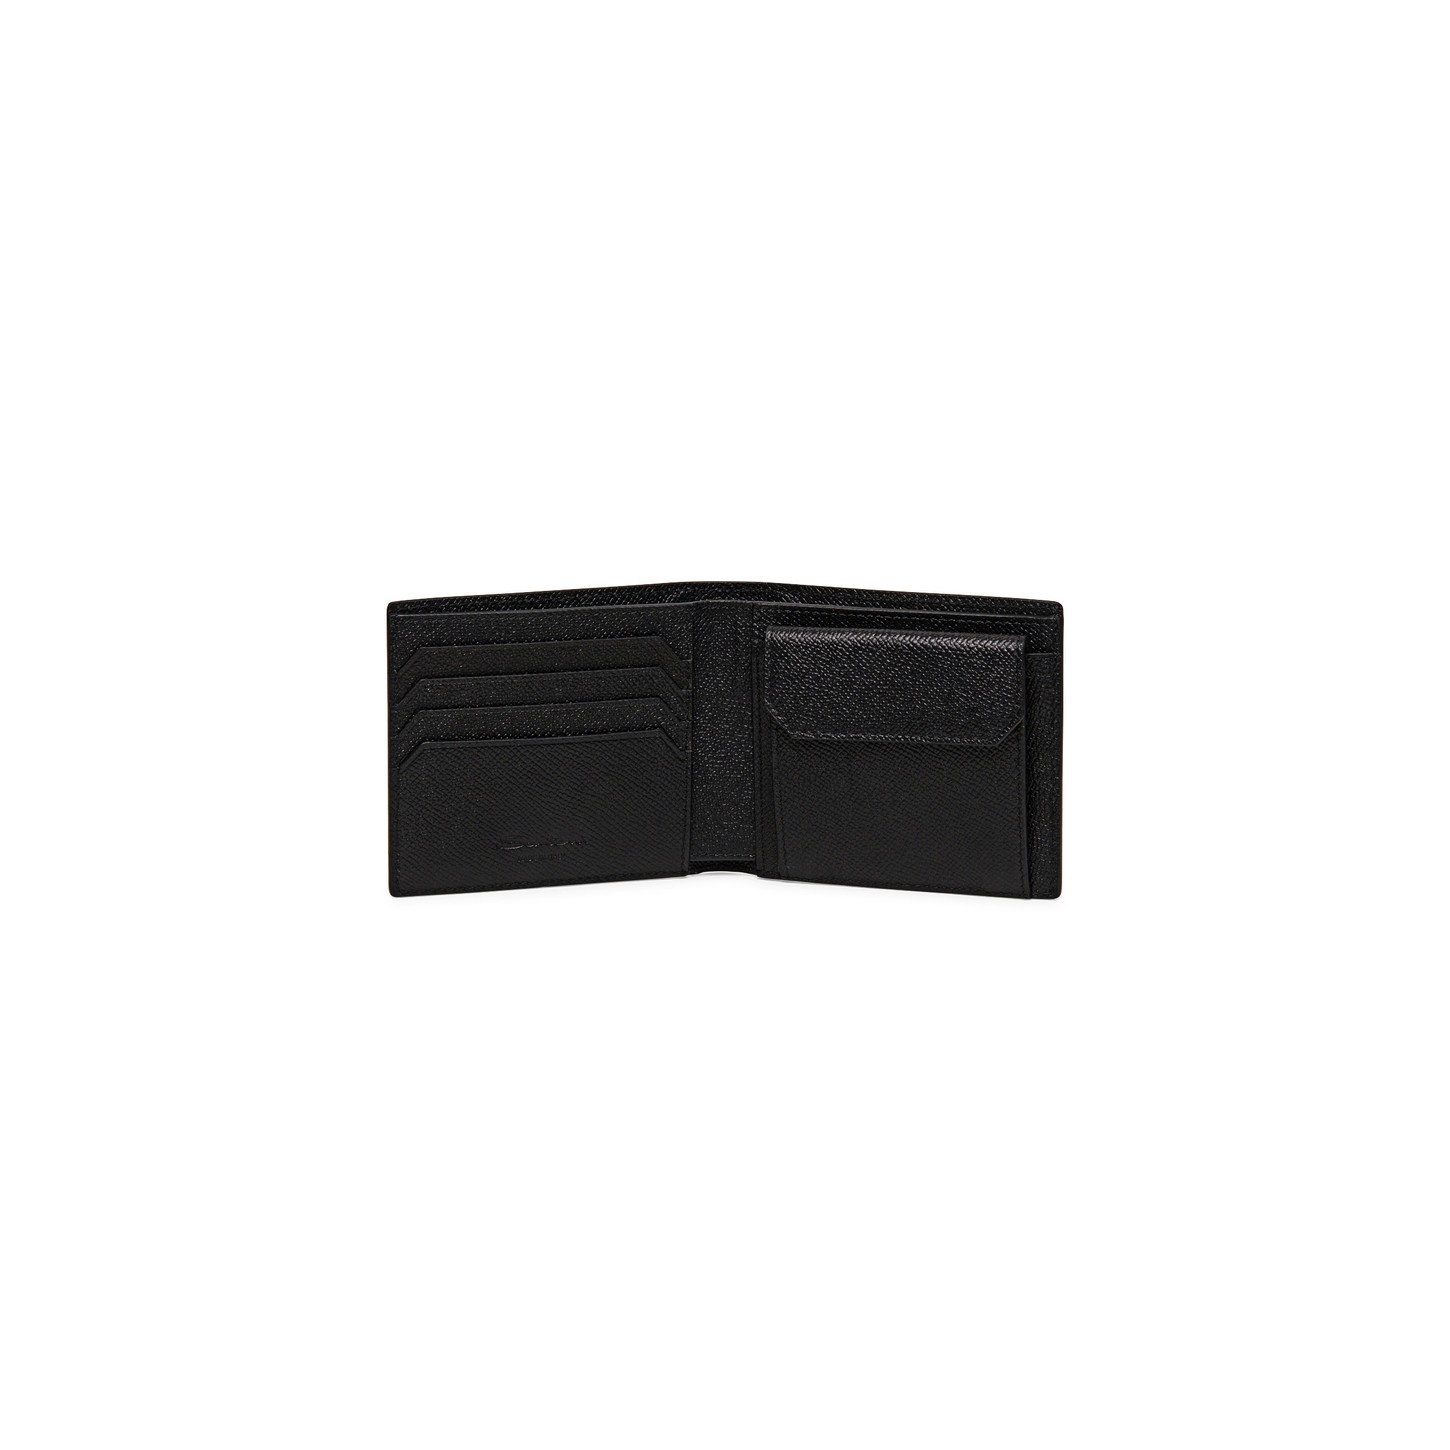 Black saffiano leather wallet with coin pocket - 3